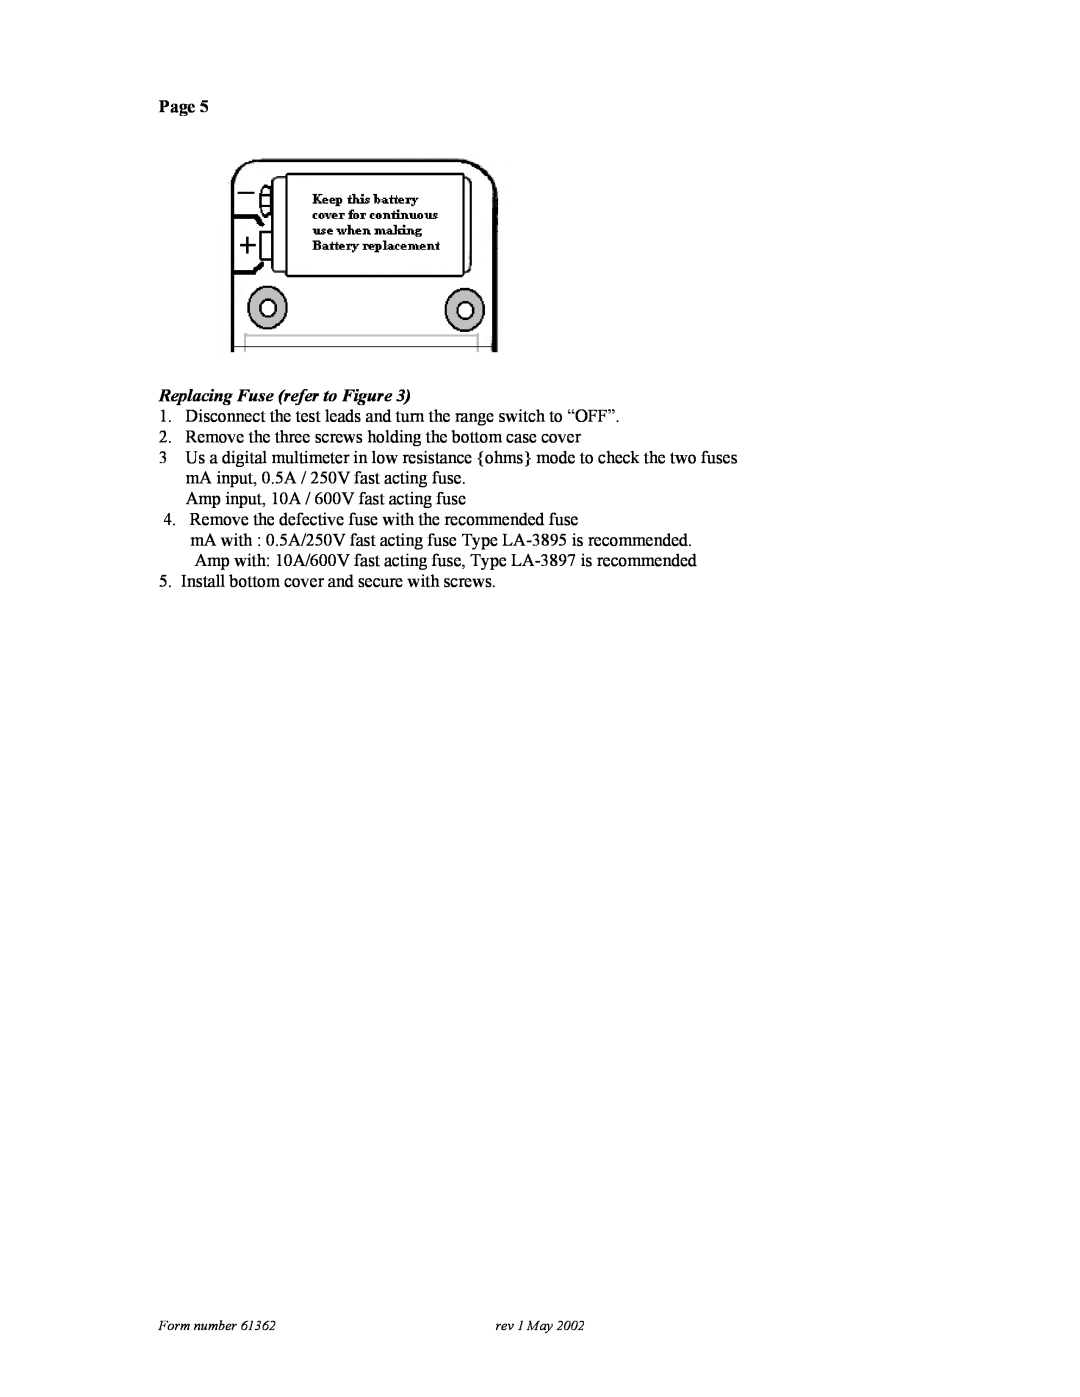 3Com 61-362 technical manual Page, Replacing Fuse refer to Figure 